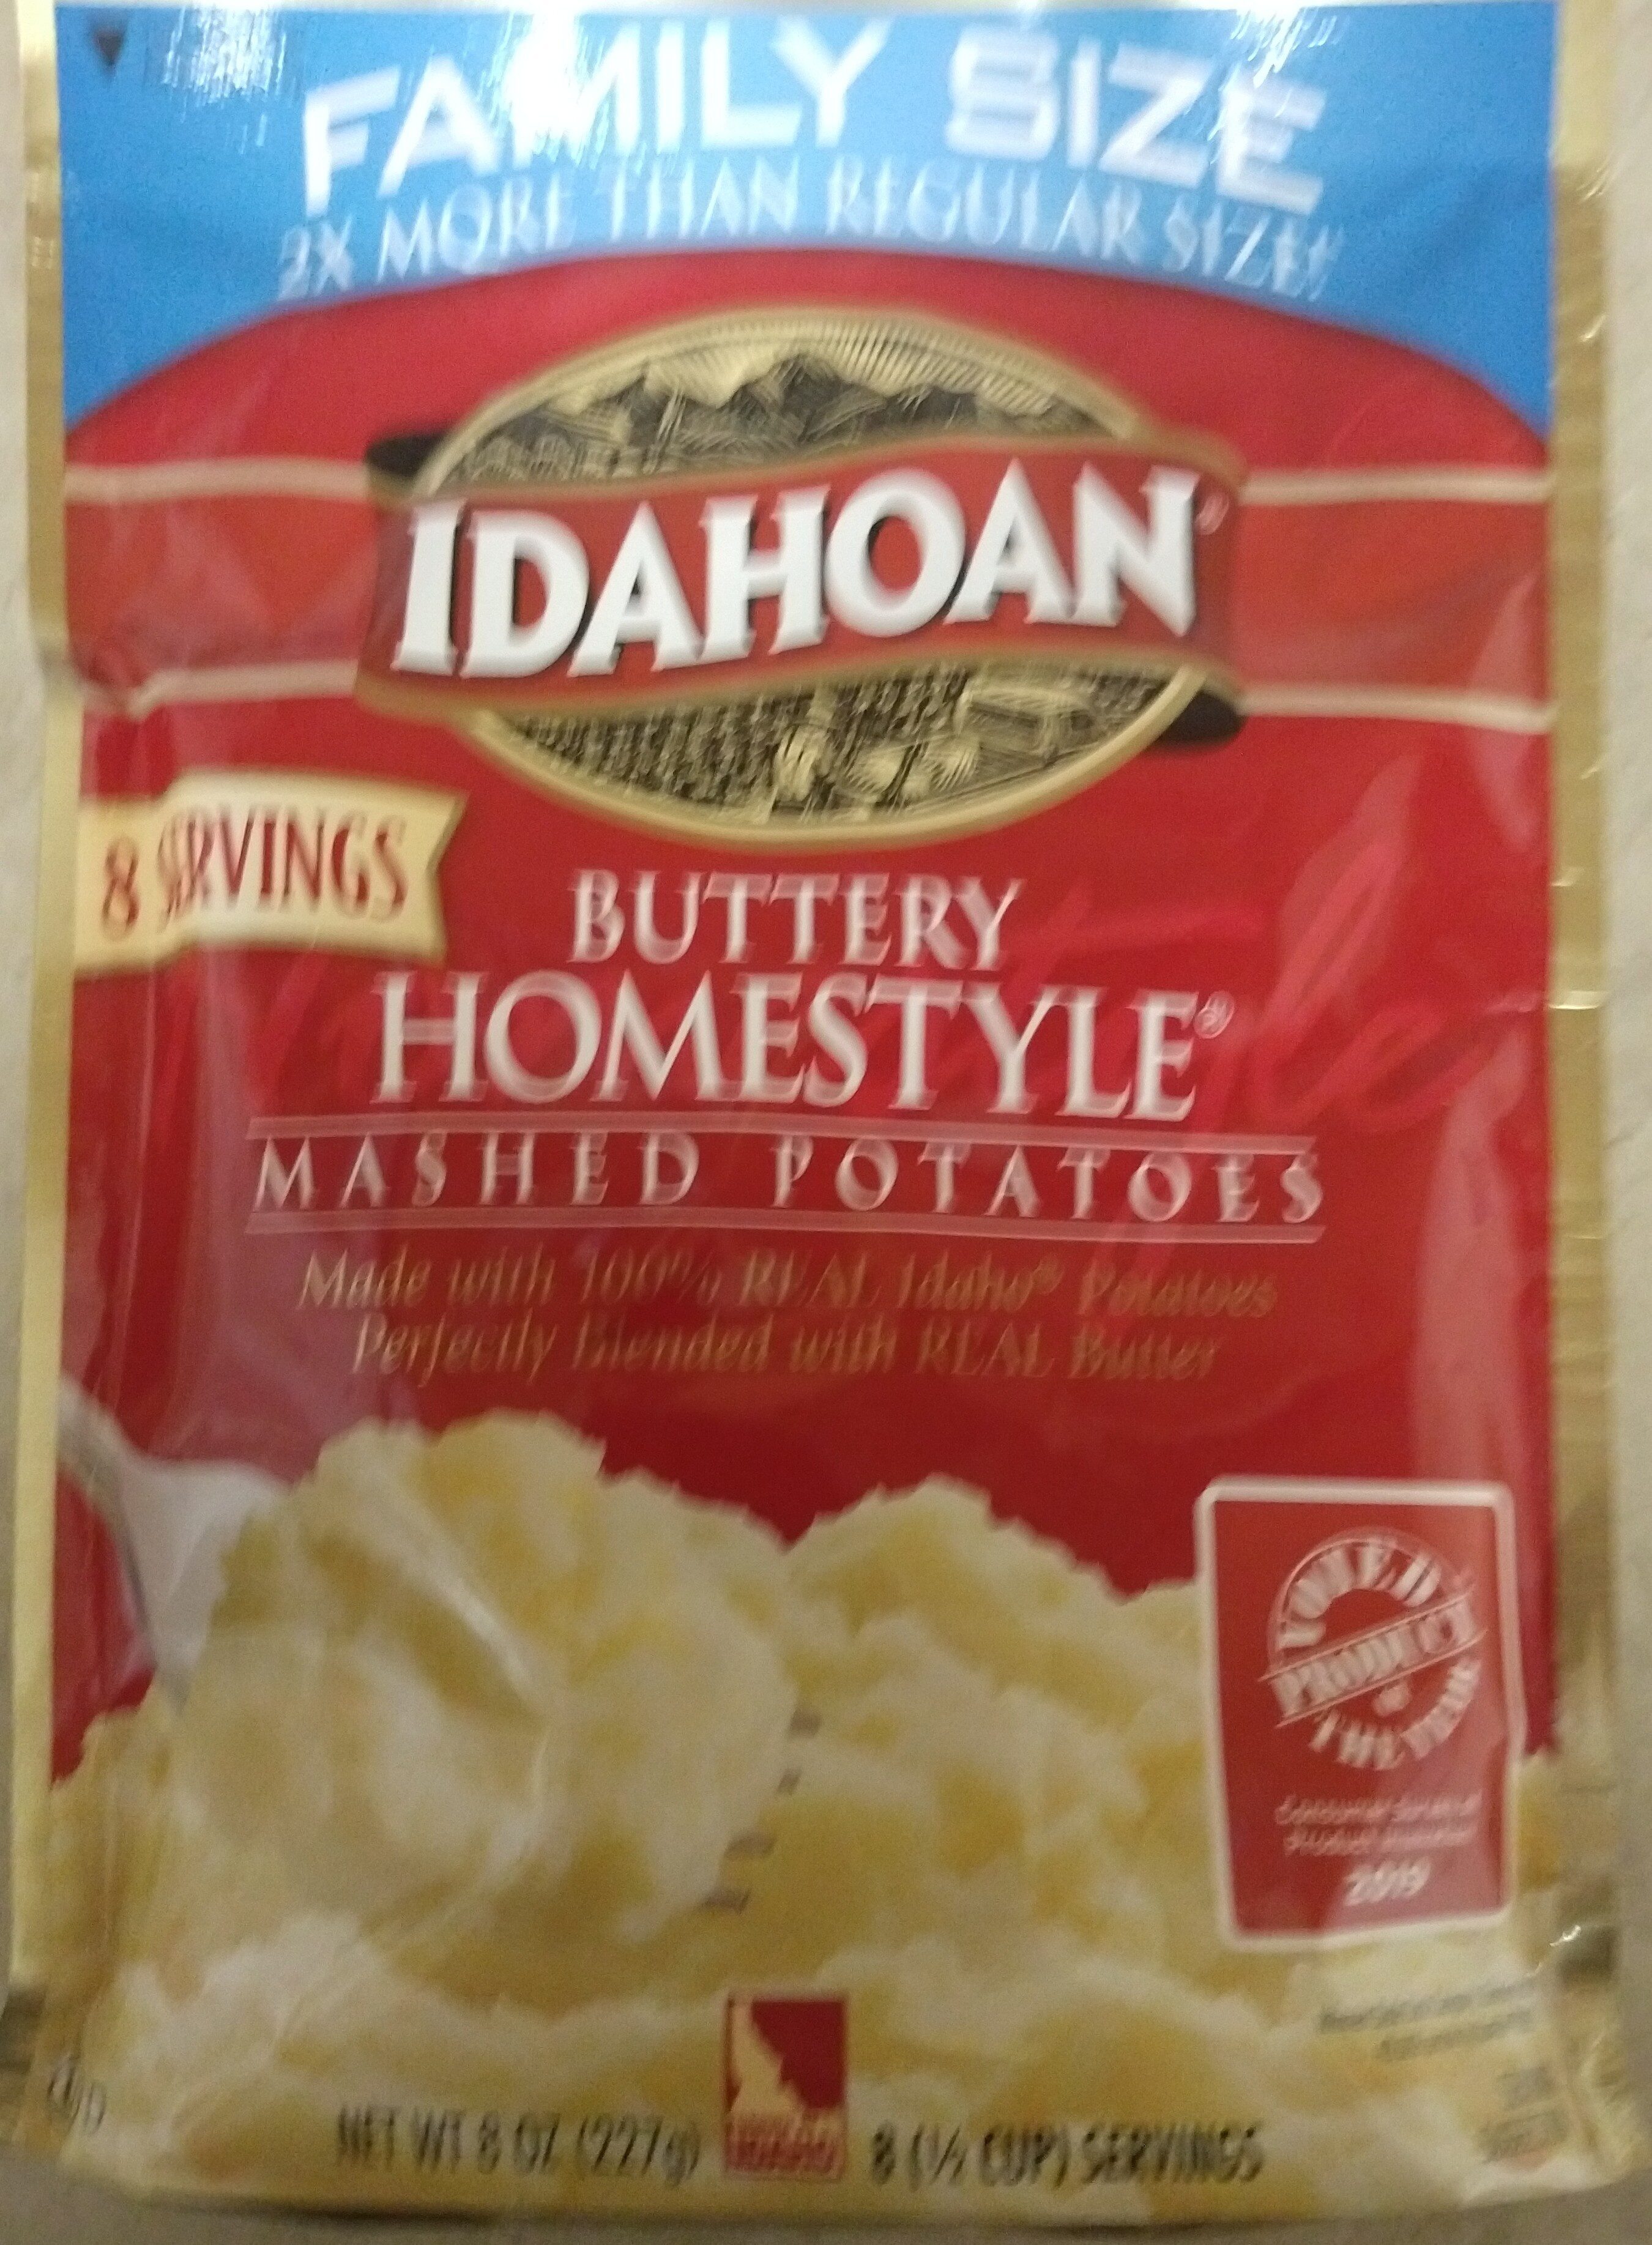 Buttery homestyle mashed potatoes - Product